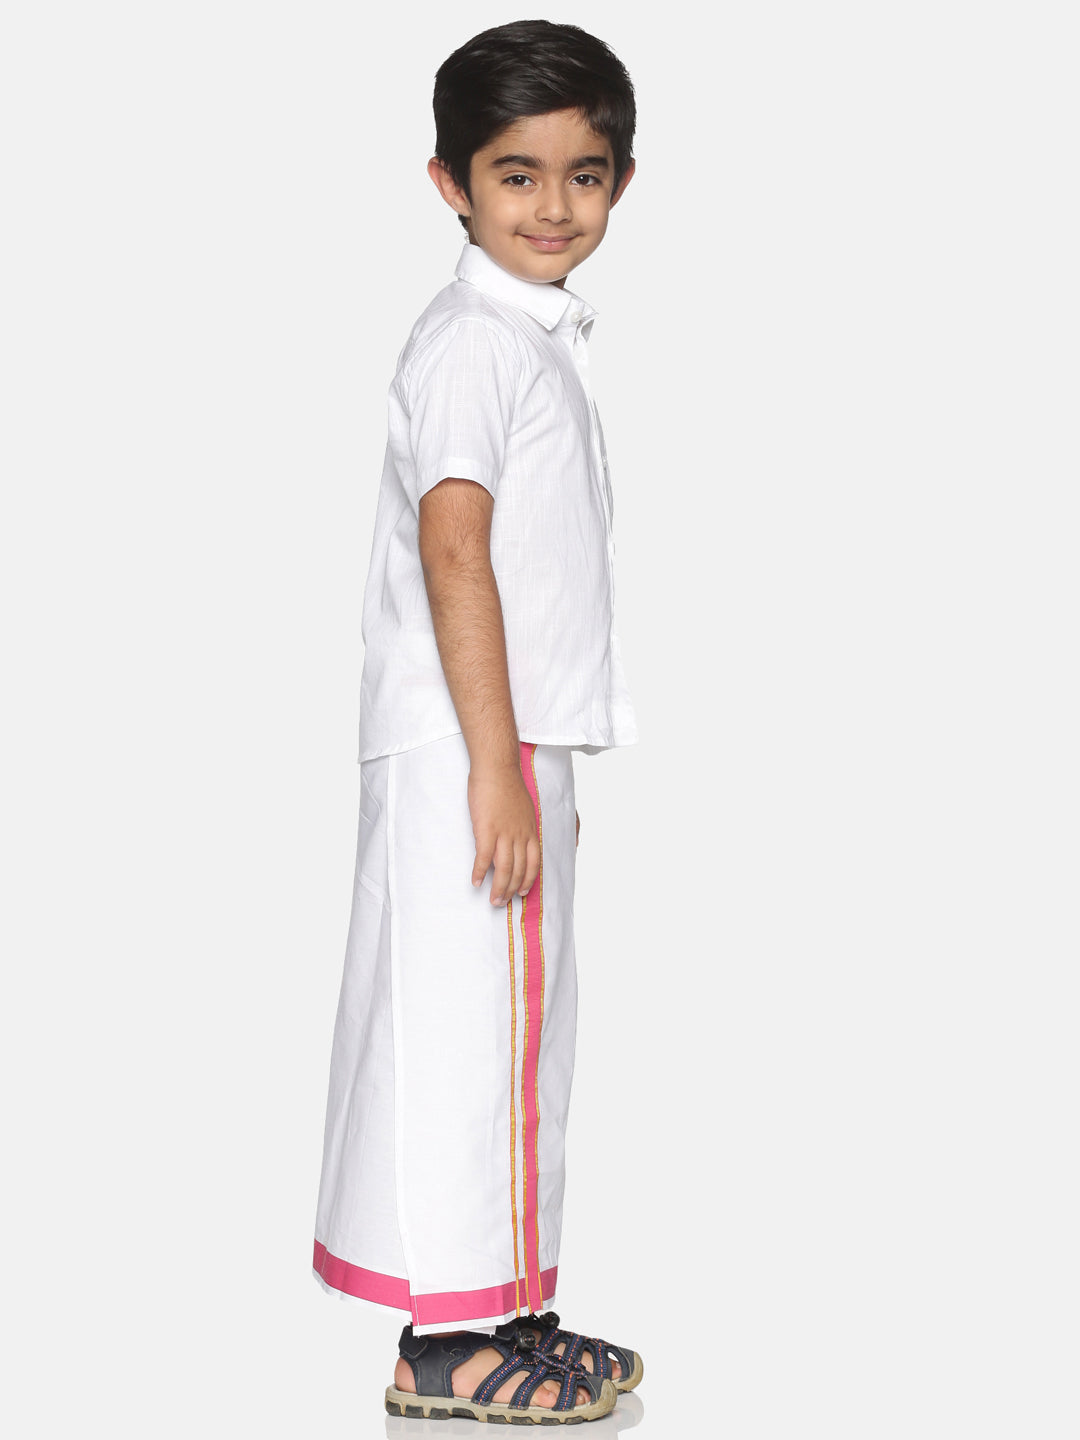 South Indian Boy dressed in traditional costume, wearing a false moustache,  acting like an adult man Stock Photo - Alamy